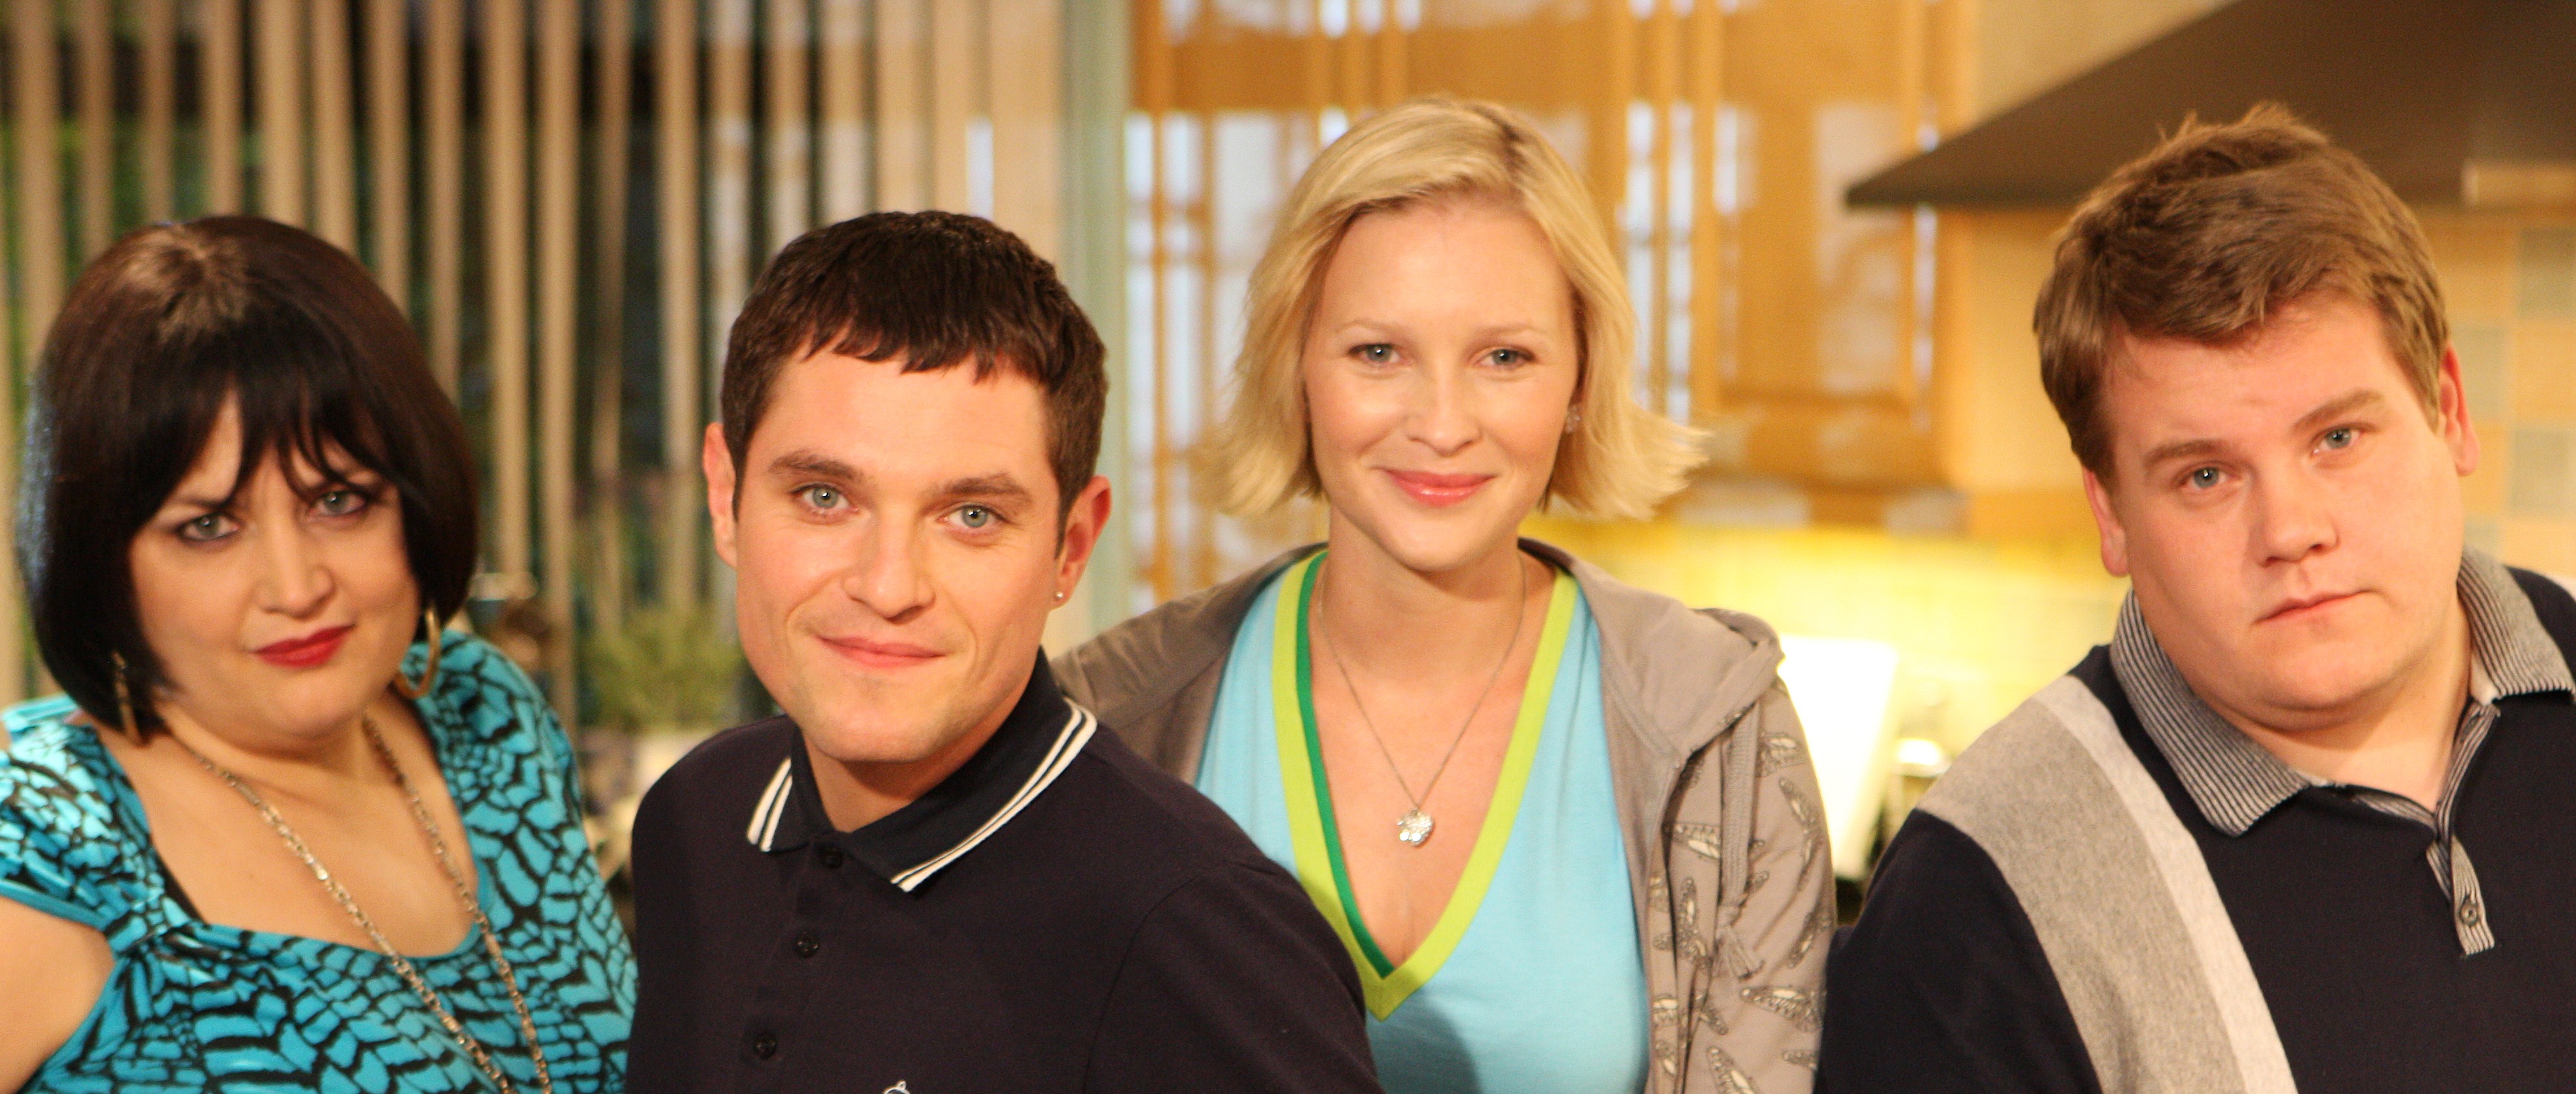 Gavin & Stacey Backgrounds, Compatible - PC, Mobile, Gadgets| 3955x1679 px